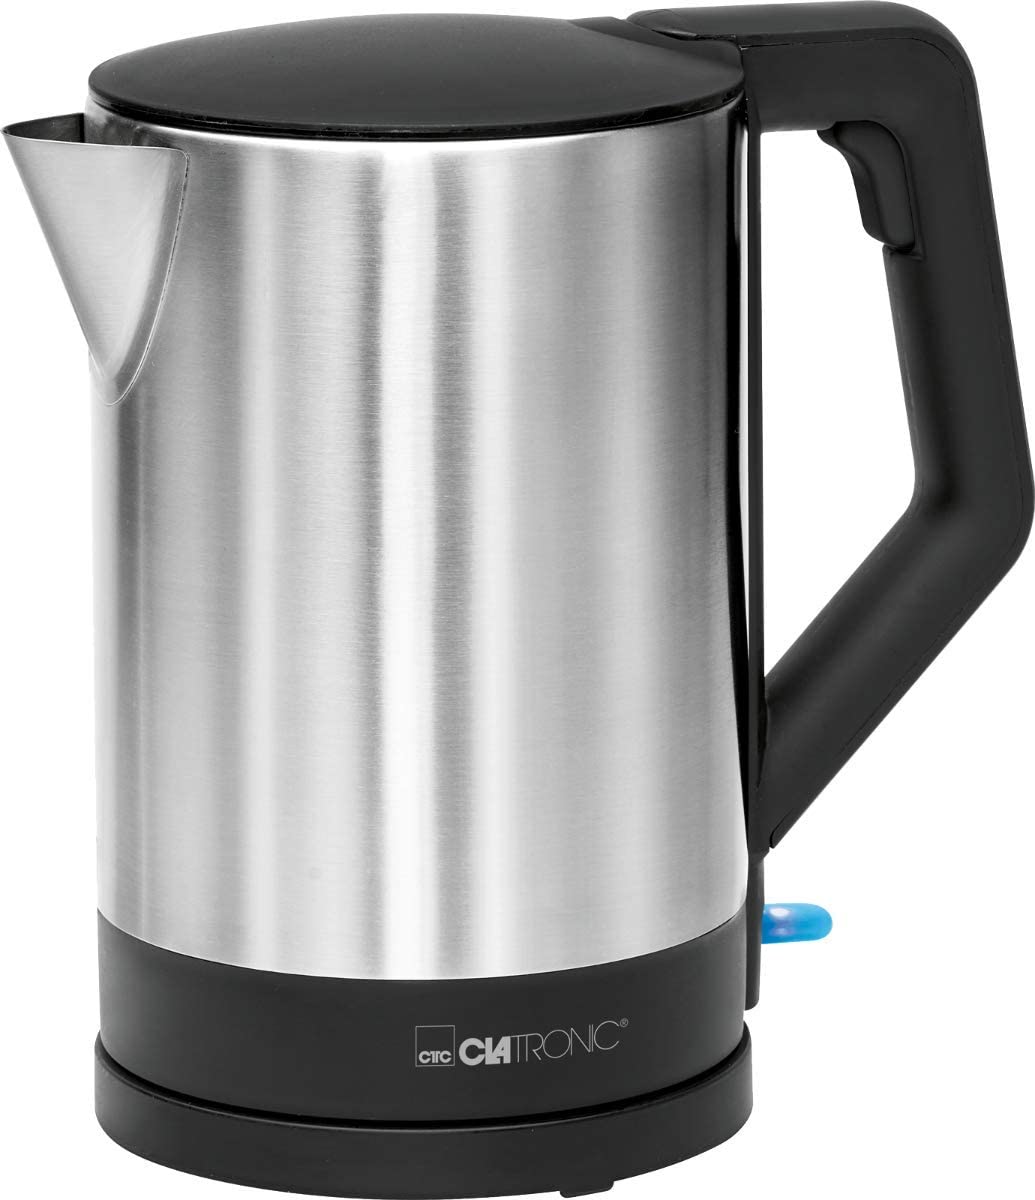 Clatronic WKS 3692 Kettle Concealed Heating Element Automatic Shut-Off Base Station with Cable Wrap 1.5 L 2200 W Stainless Steel Black Stainless Steel